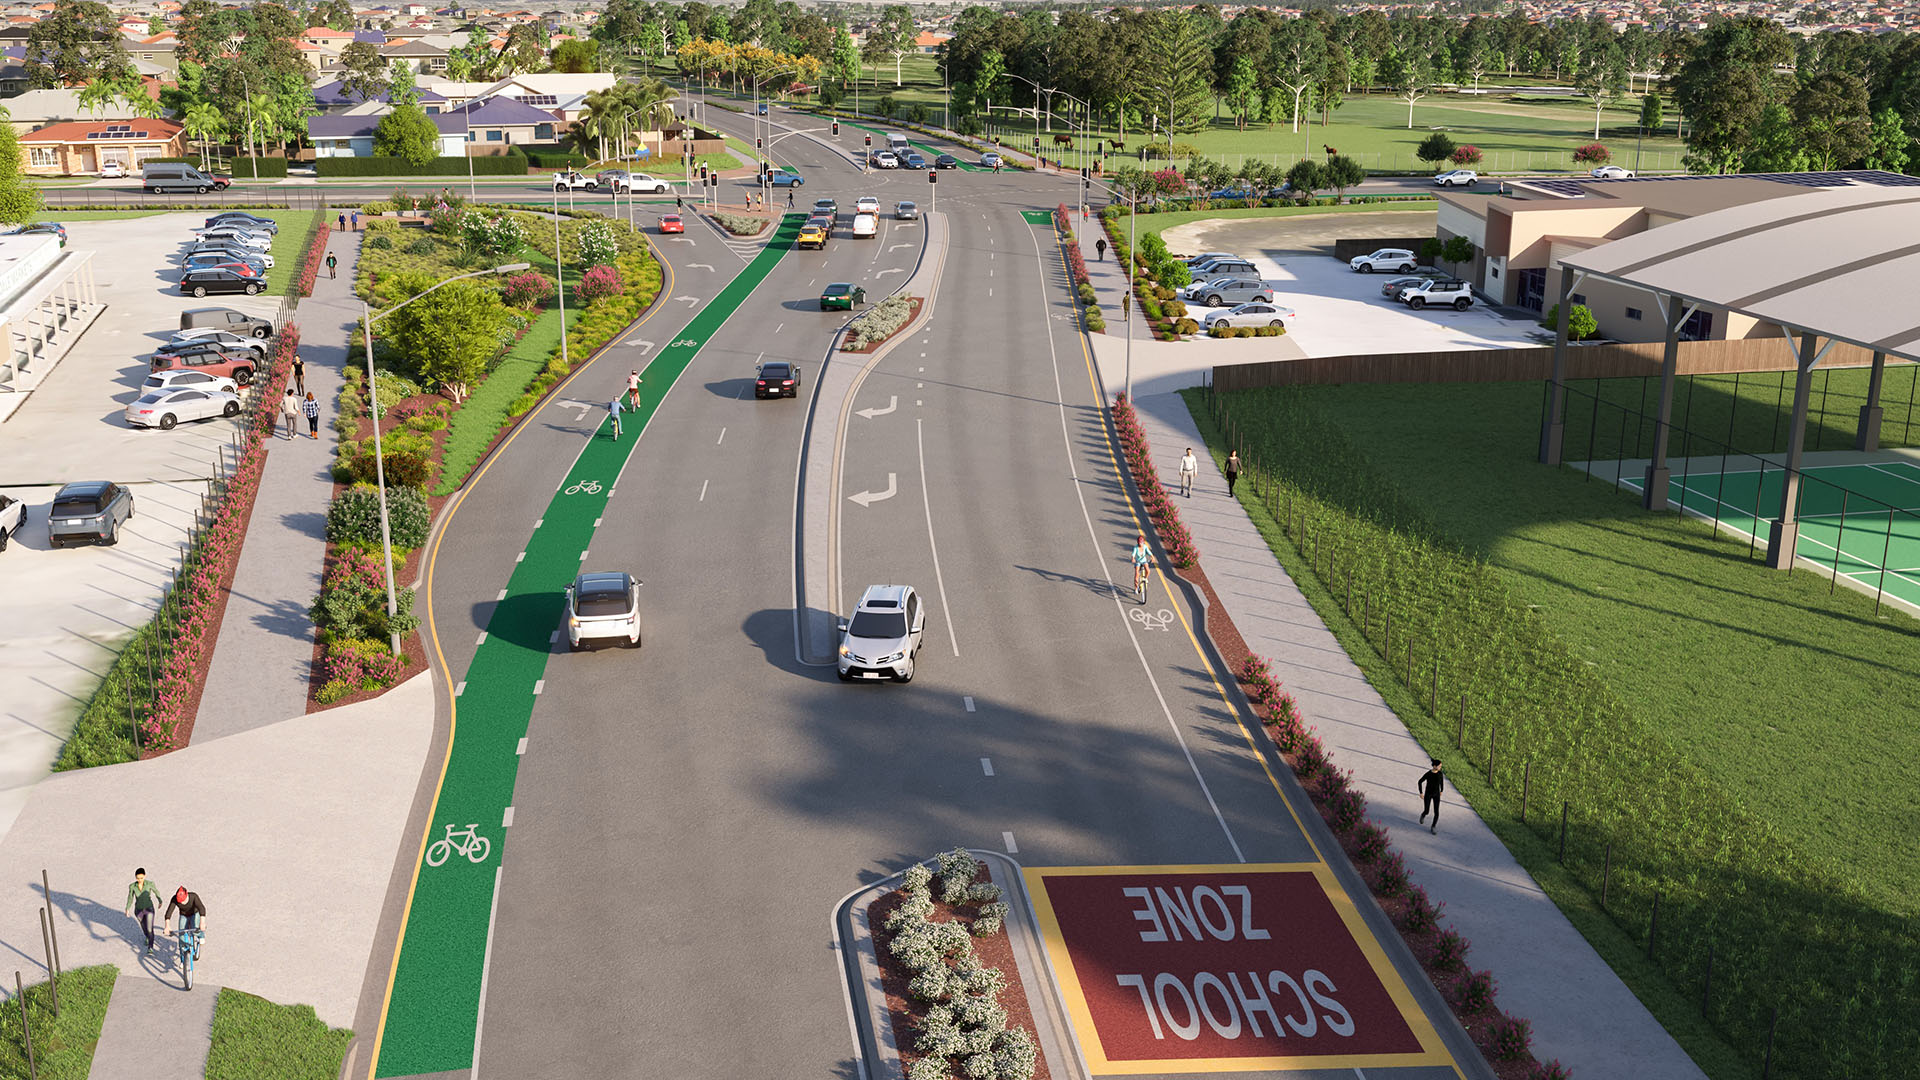 Artist impression - Aerial view of Rochedale Road approaching the intersetion with Preistdale Road